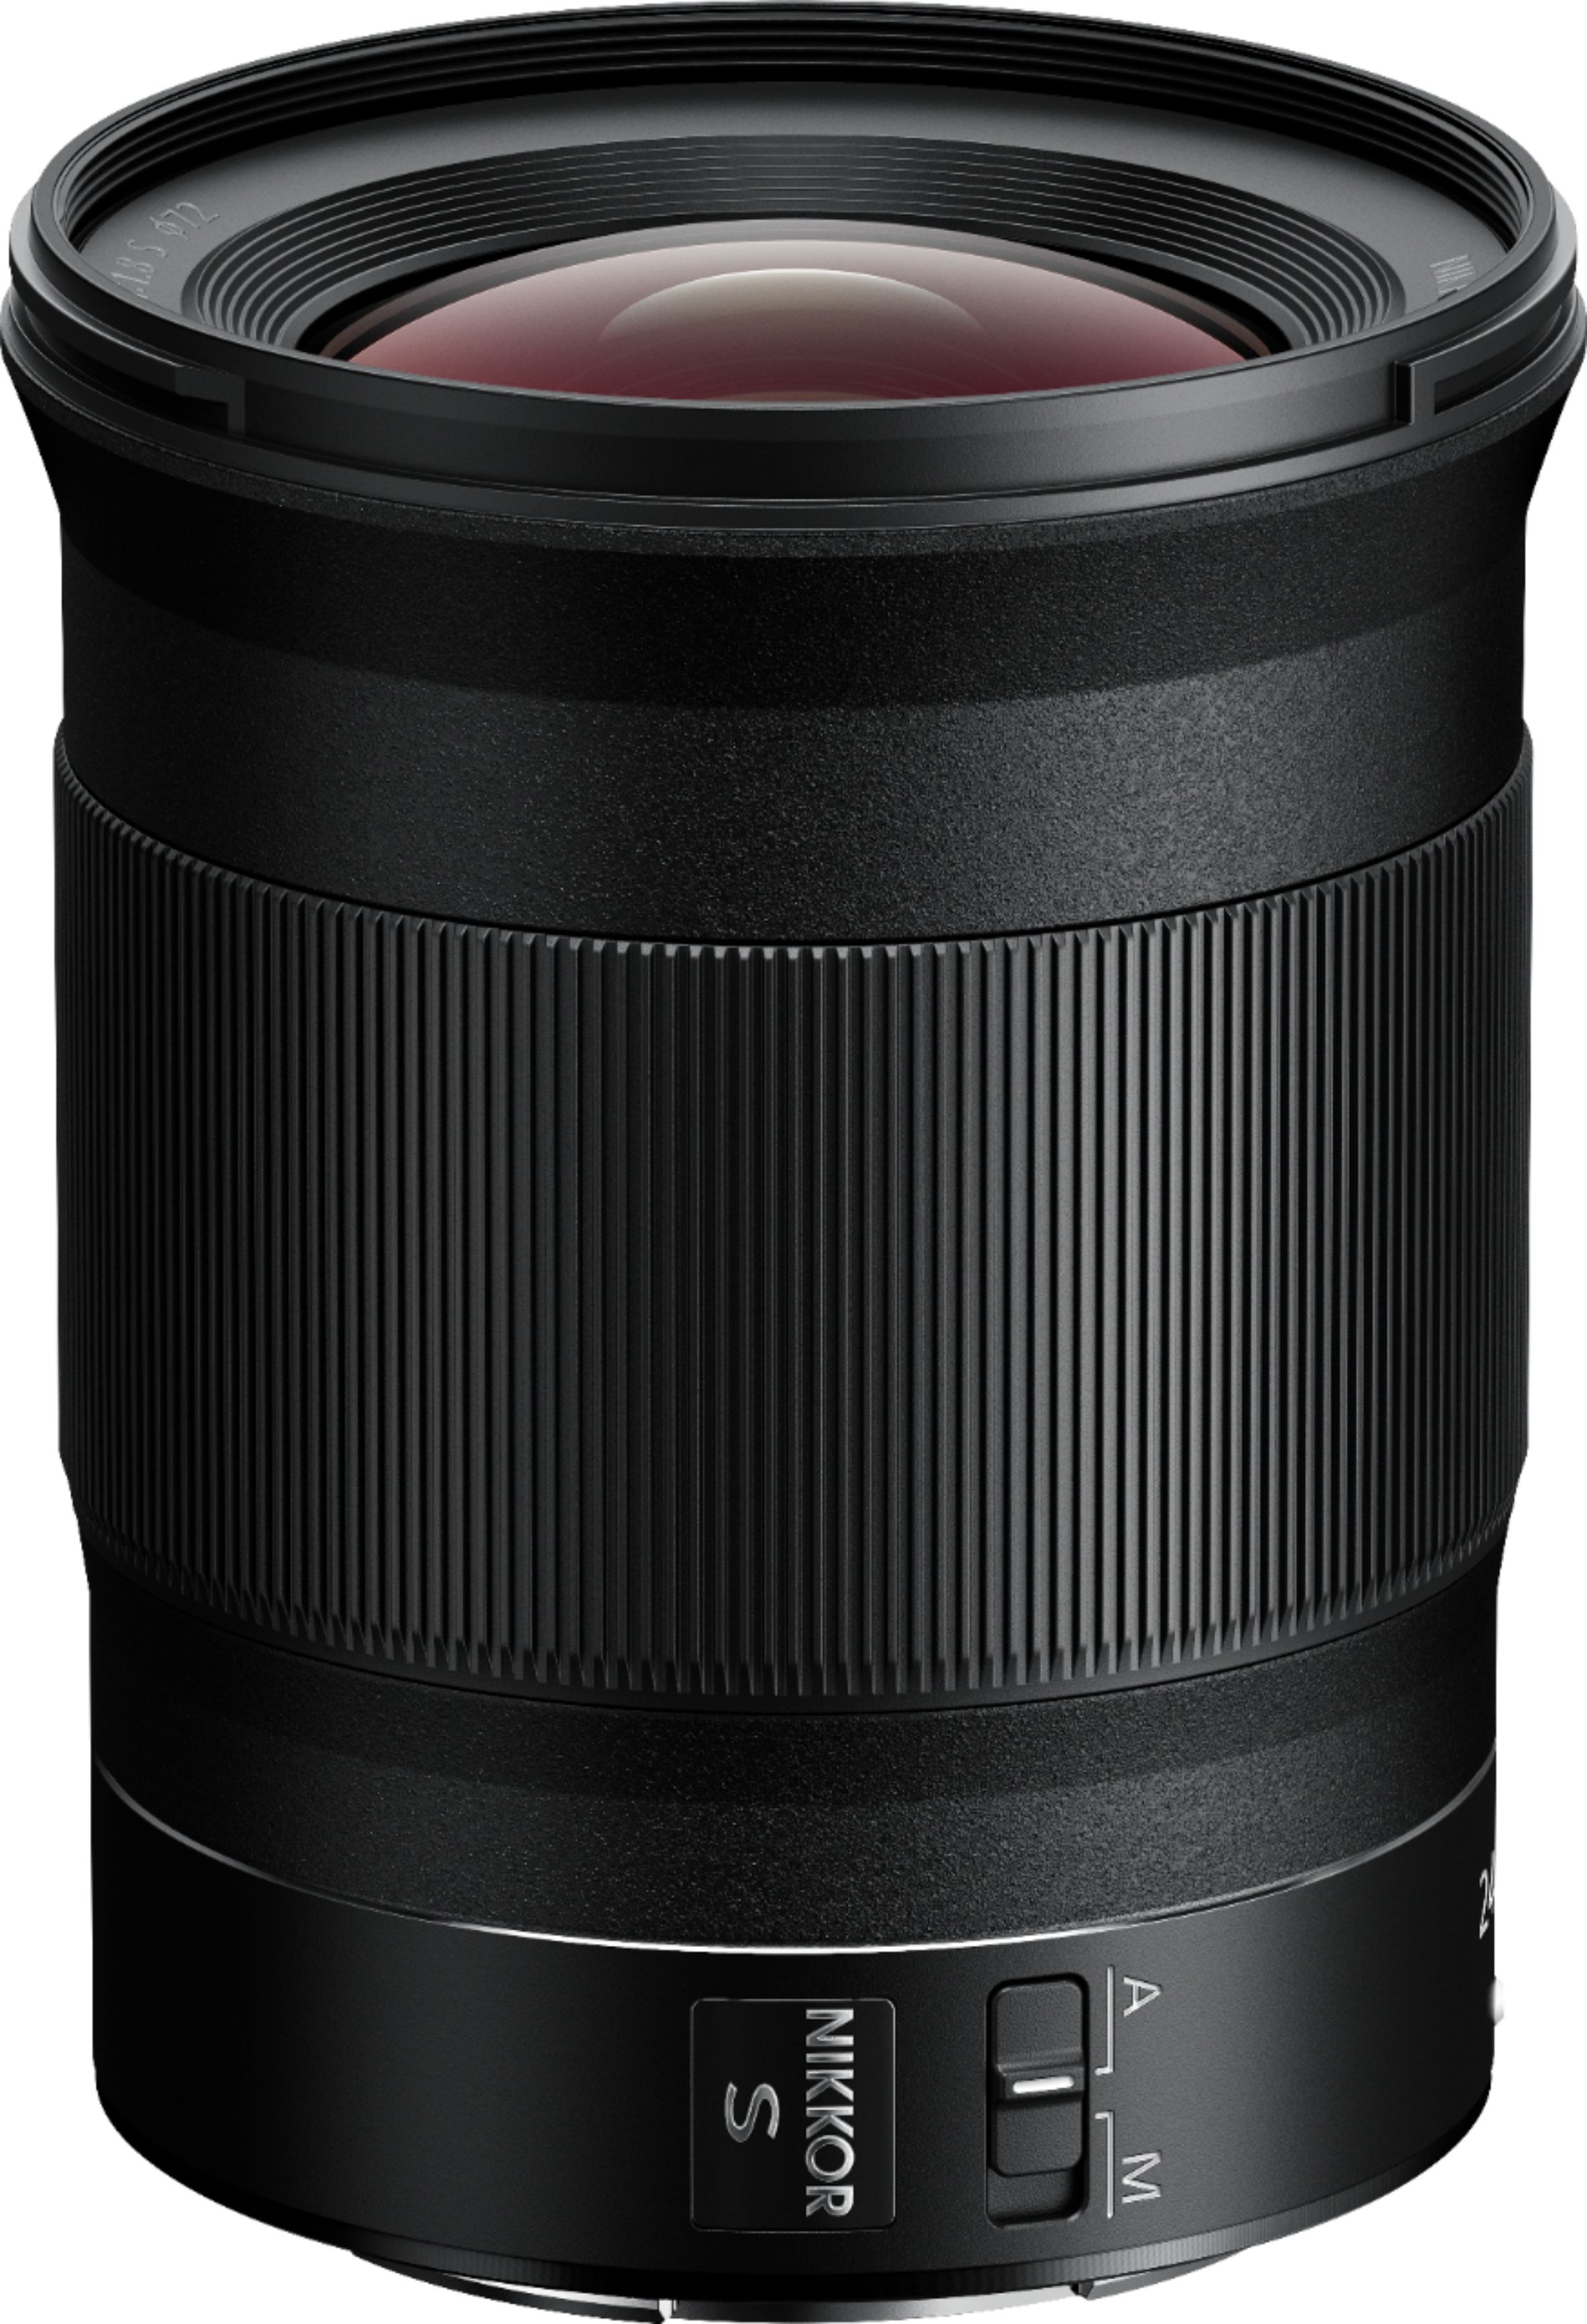 Angle View: LUMIX S PRO 50mm F1.4 Standard Prime Lens for Panasonic LUMIX S Series Cameras, S-X50